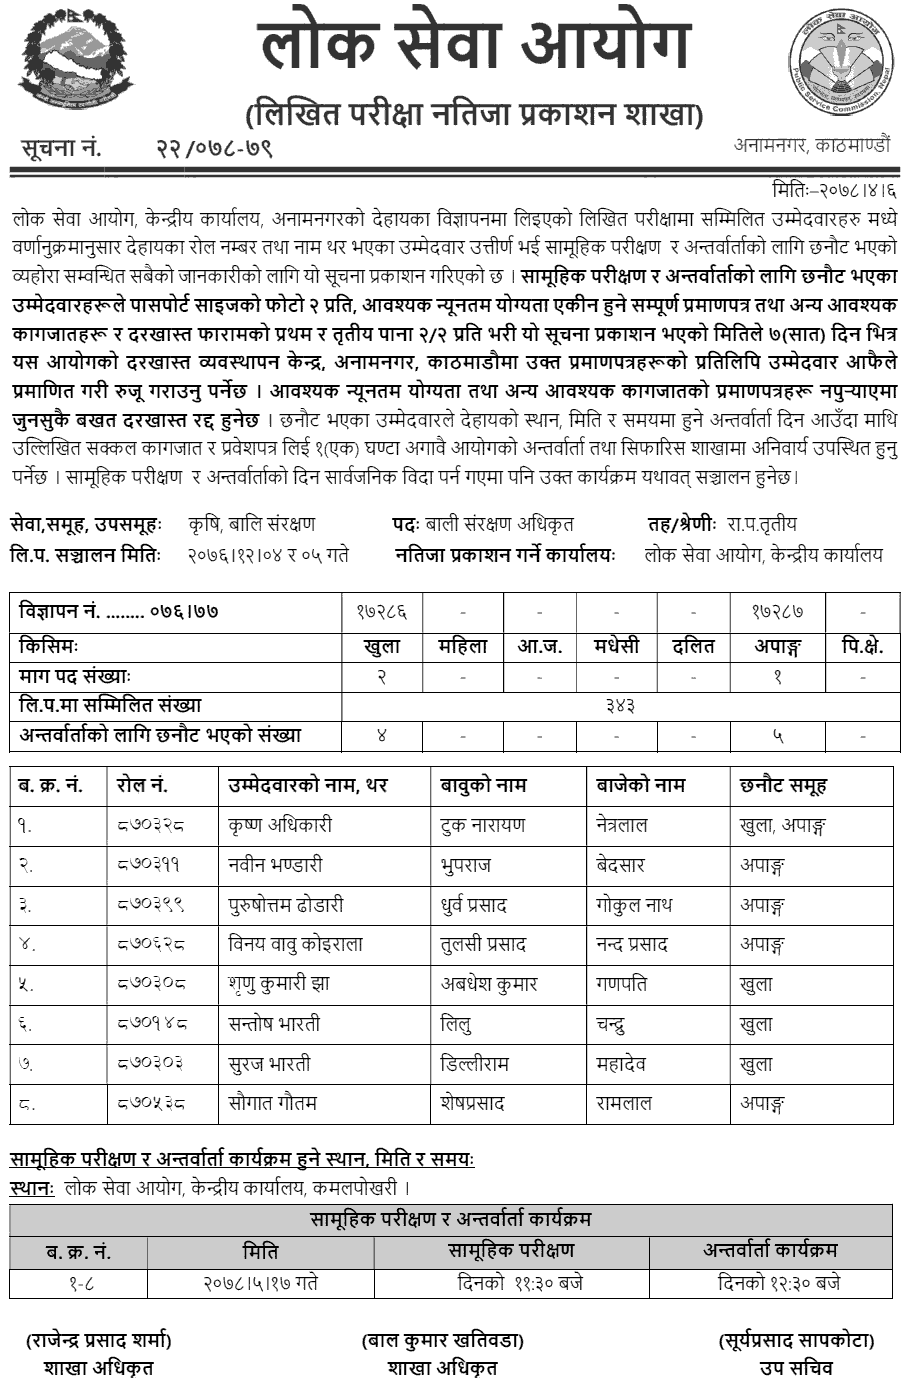 Lok Sewa Aayog Published Written Exam Result of Agriculture and Animal Officer